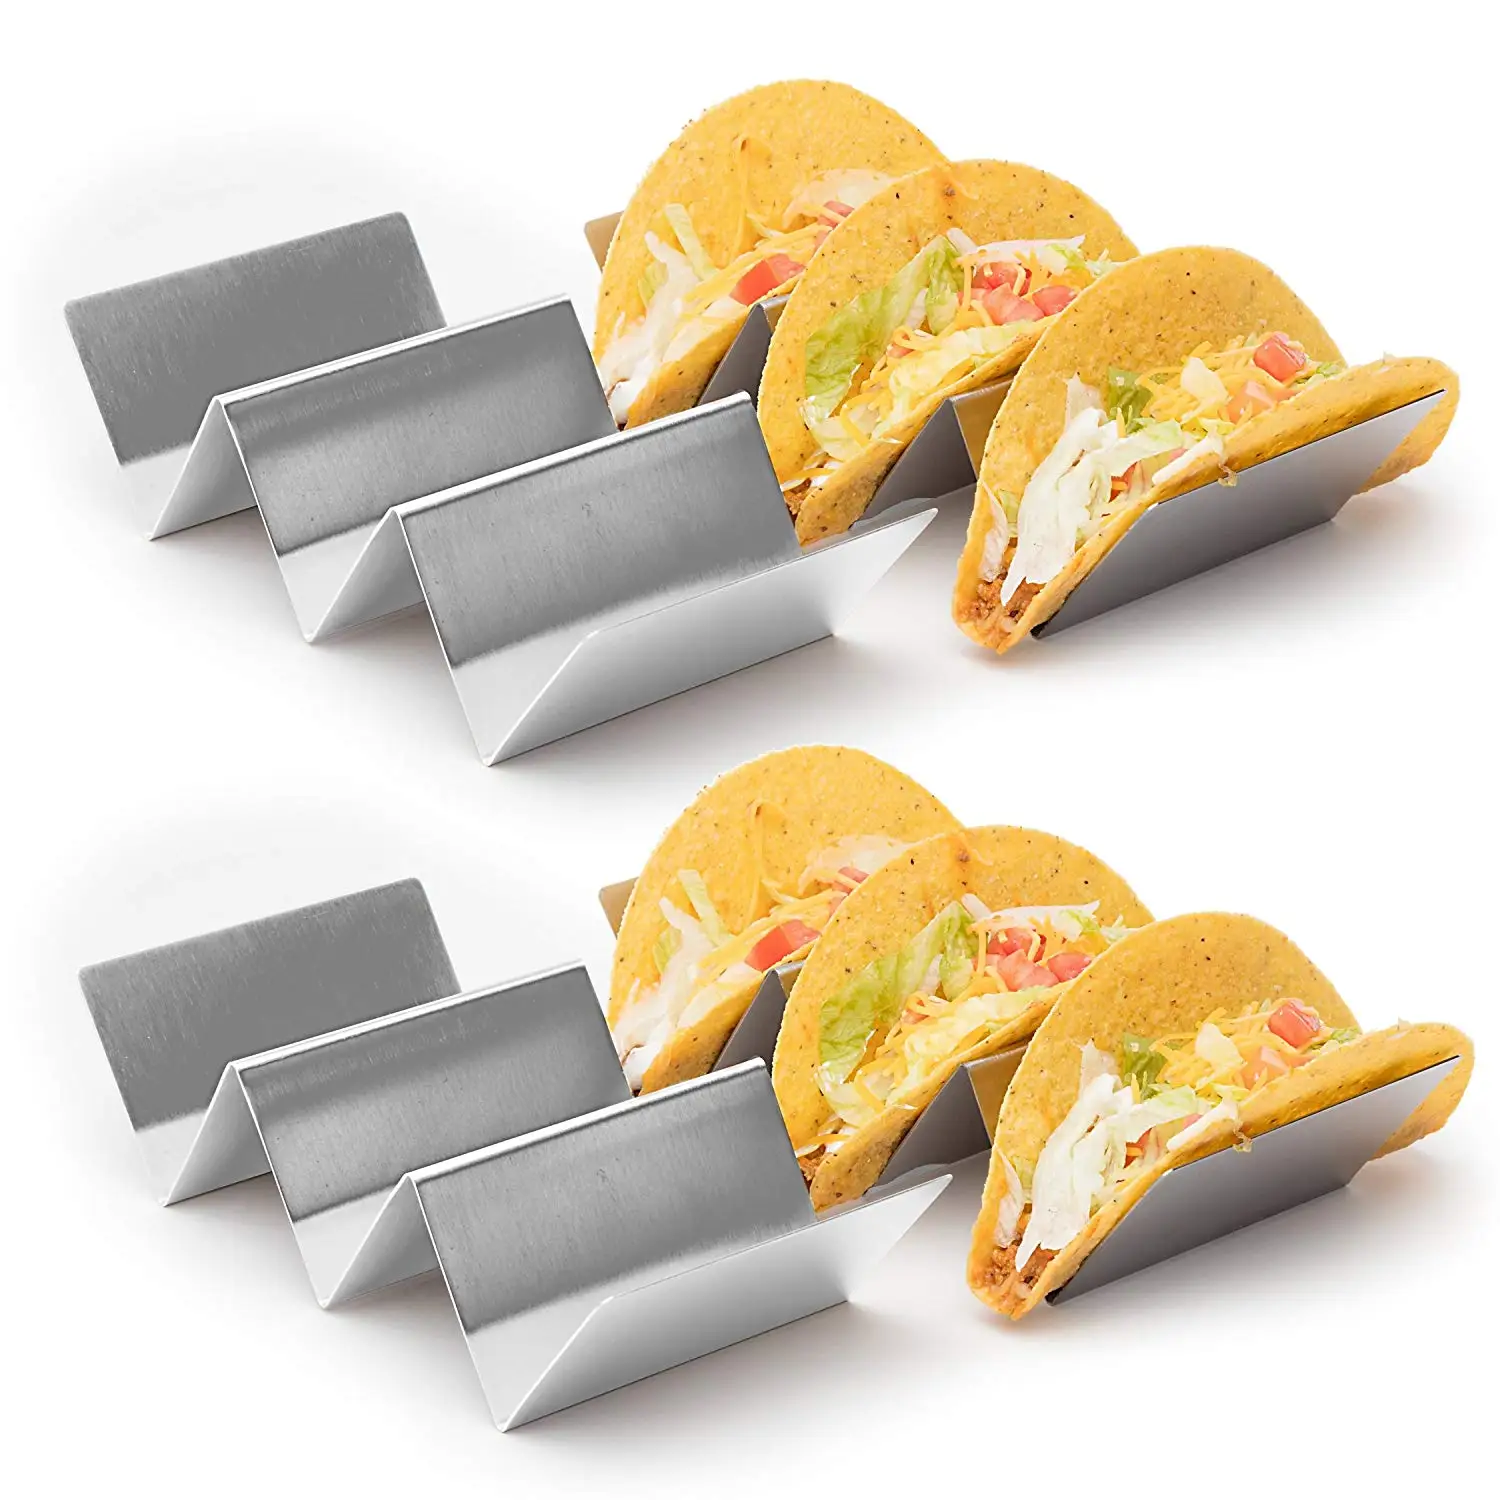 Outdoor Grill Safe UNIQUELY- 3 Pack Stainless Steel Stand Taco Holder Lightweight and Smooth Edges by Divyne Inc. Dishwasher Safe Oven Safe For Baking Taco Tray